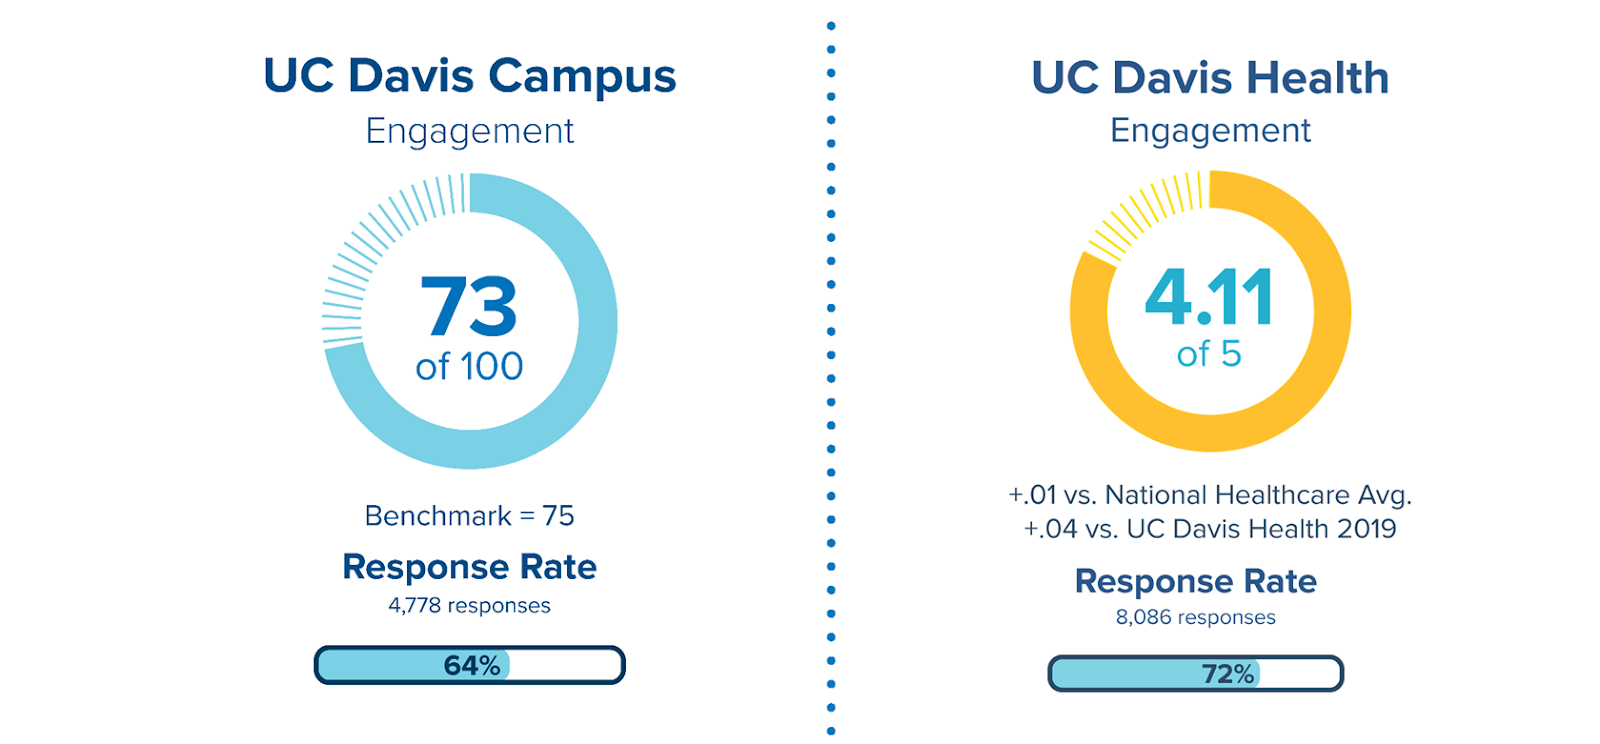 UC Davis Campus’ engagement score was 73 out of 100, with a benchmark of 75 and a response rate of 64% (4,778 responses total.) UC Davis Health’s engagement score was 4.11 out of 5, which is .01 higher than the National Healthcare Average and .04 high than UC Davis Health’s score in 2019. There was a response rate of 72% thanks to 8,086 respondents. 